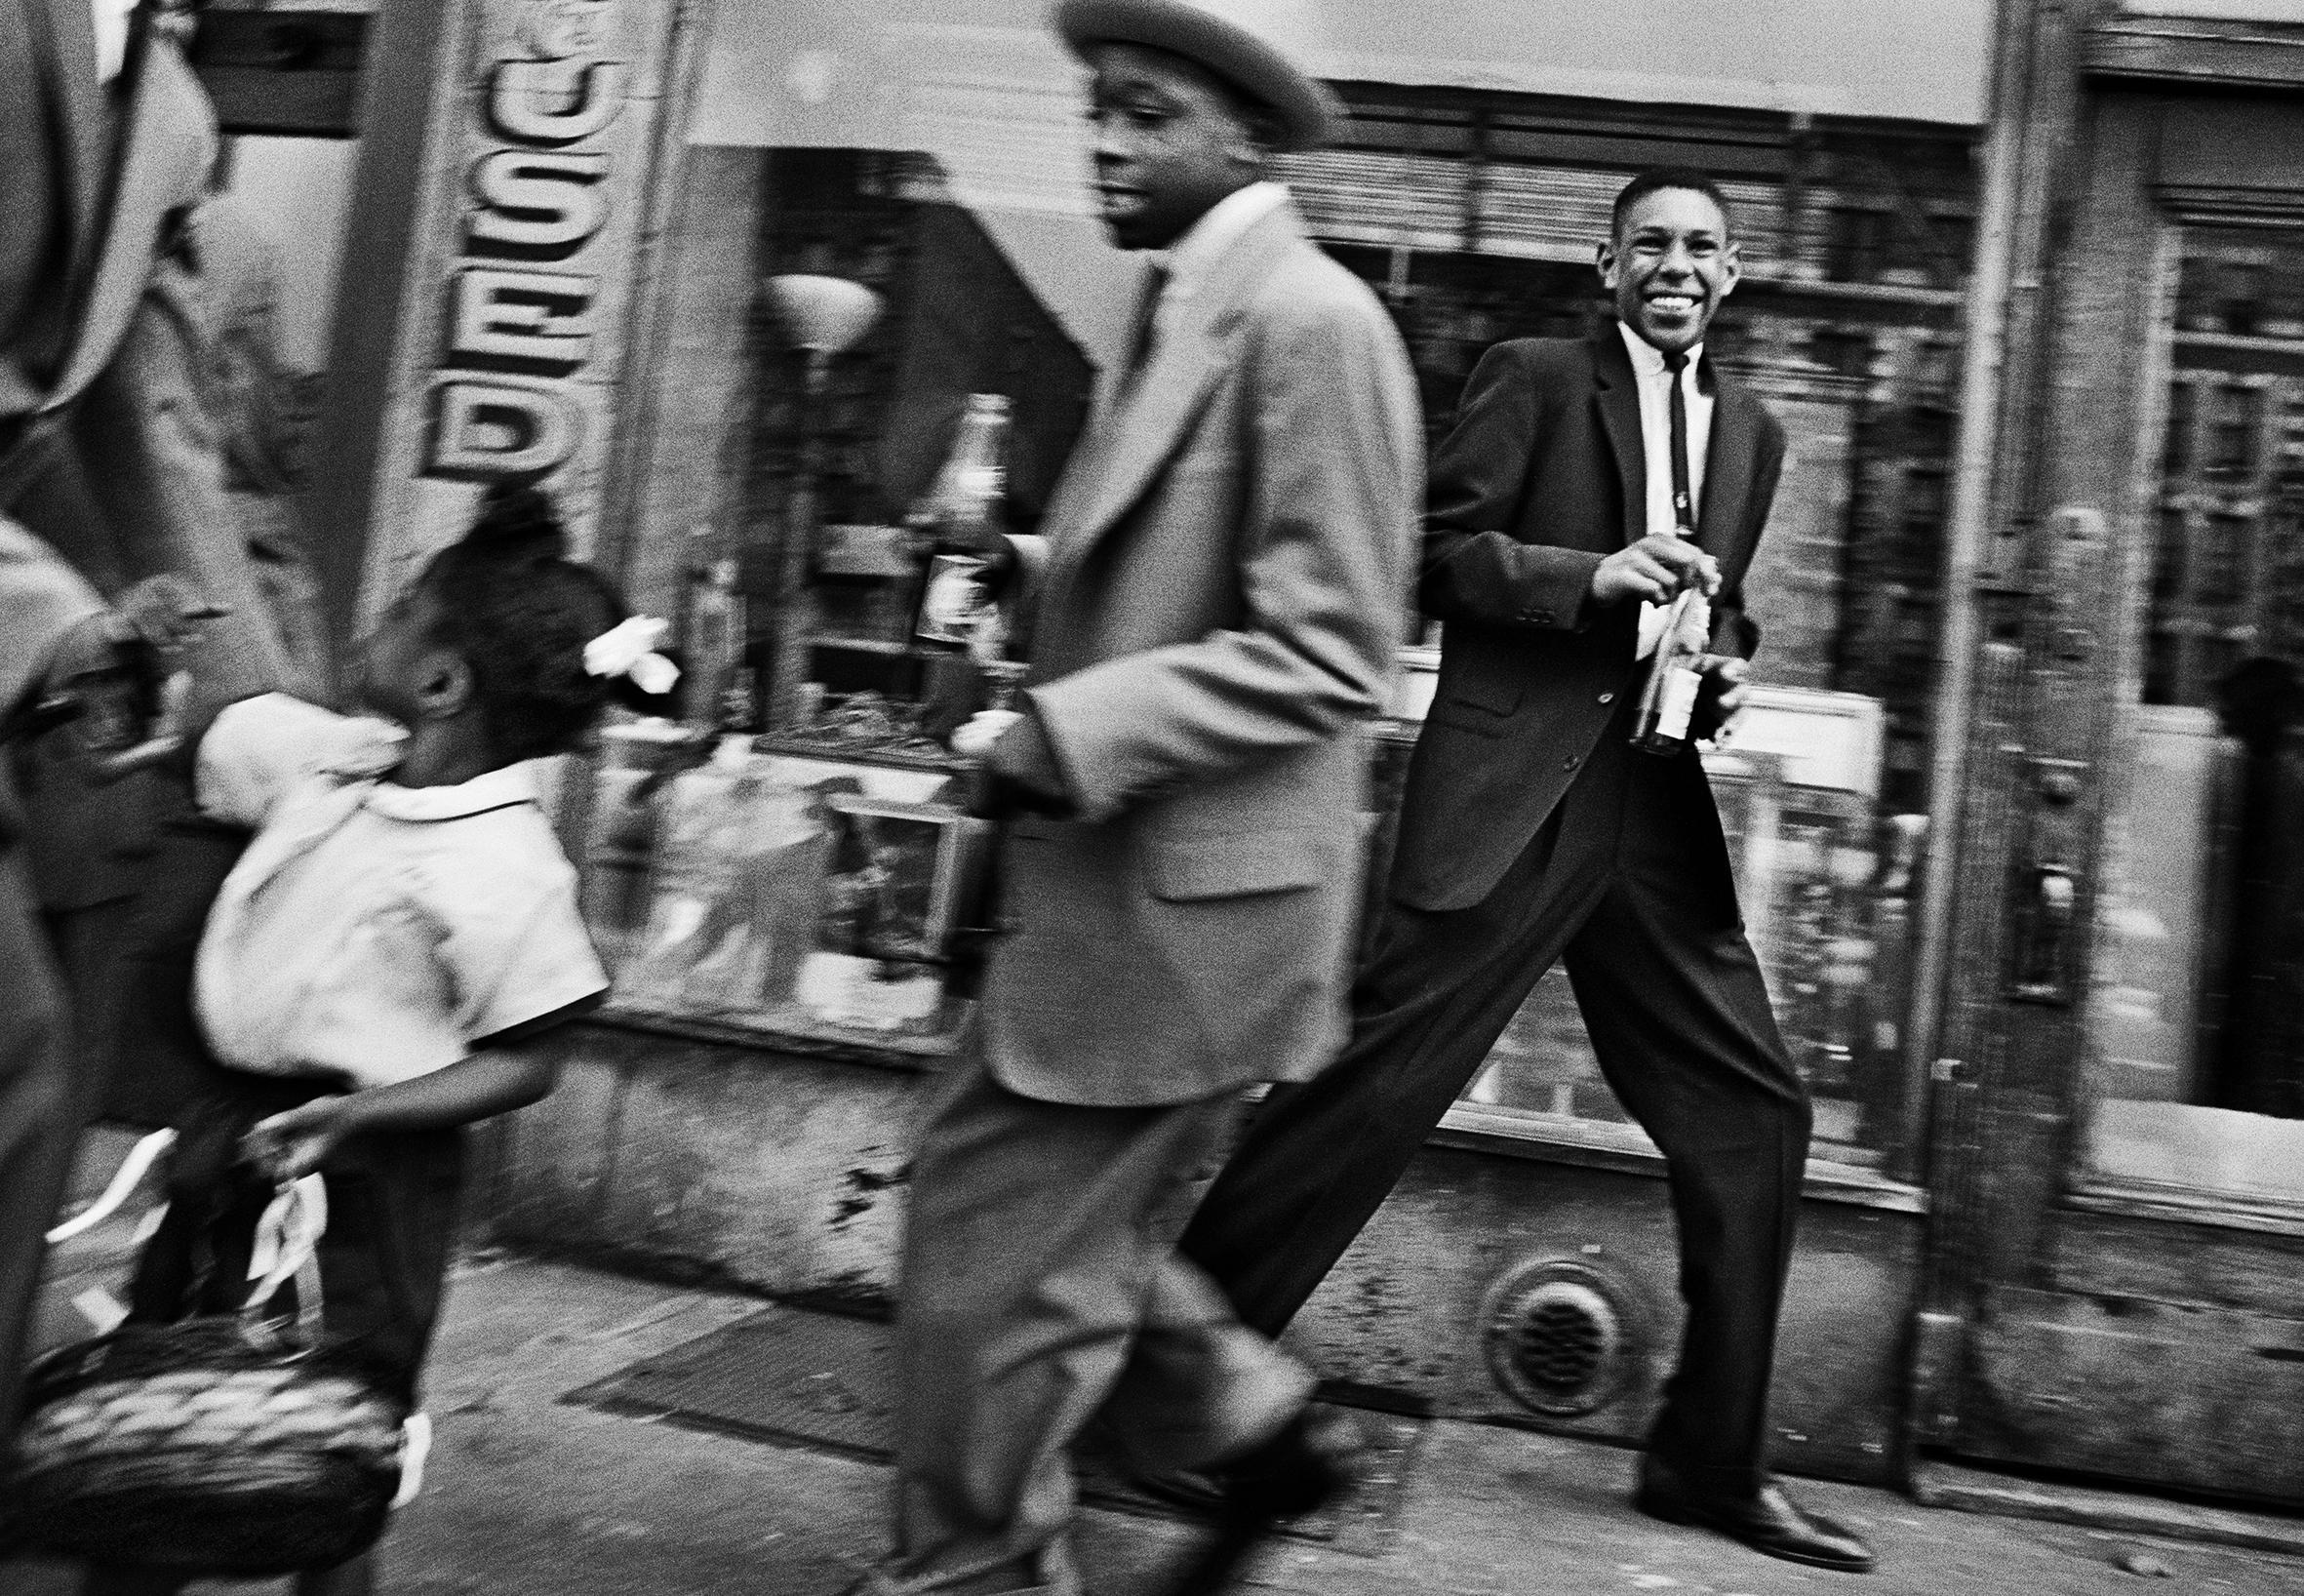 Black-and-white photo of two people in suits dancing outside of a store in Harlem